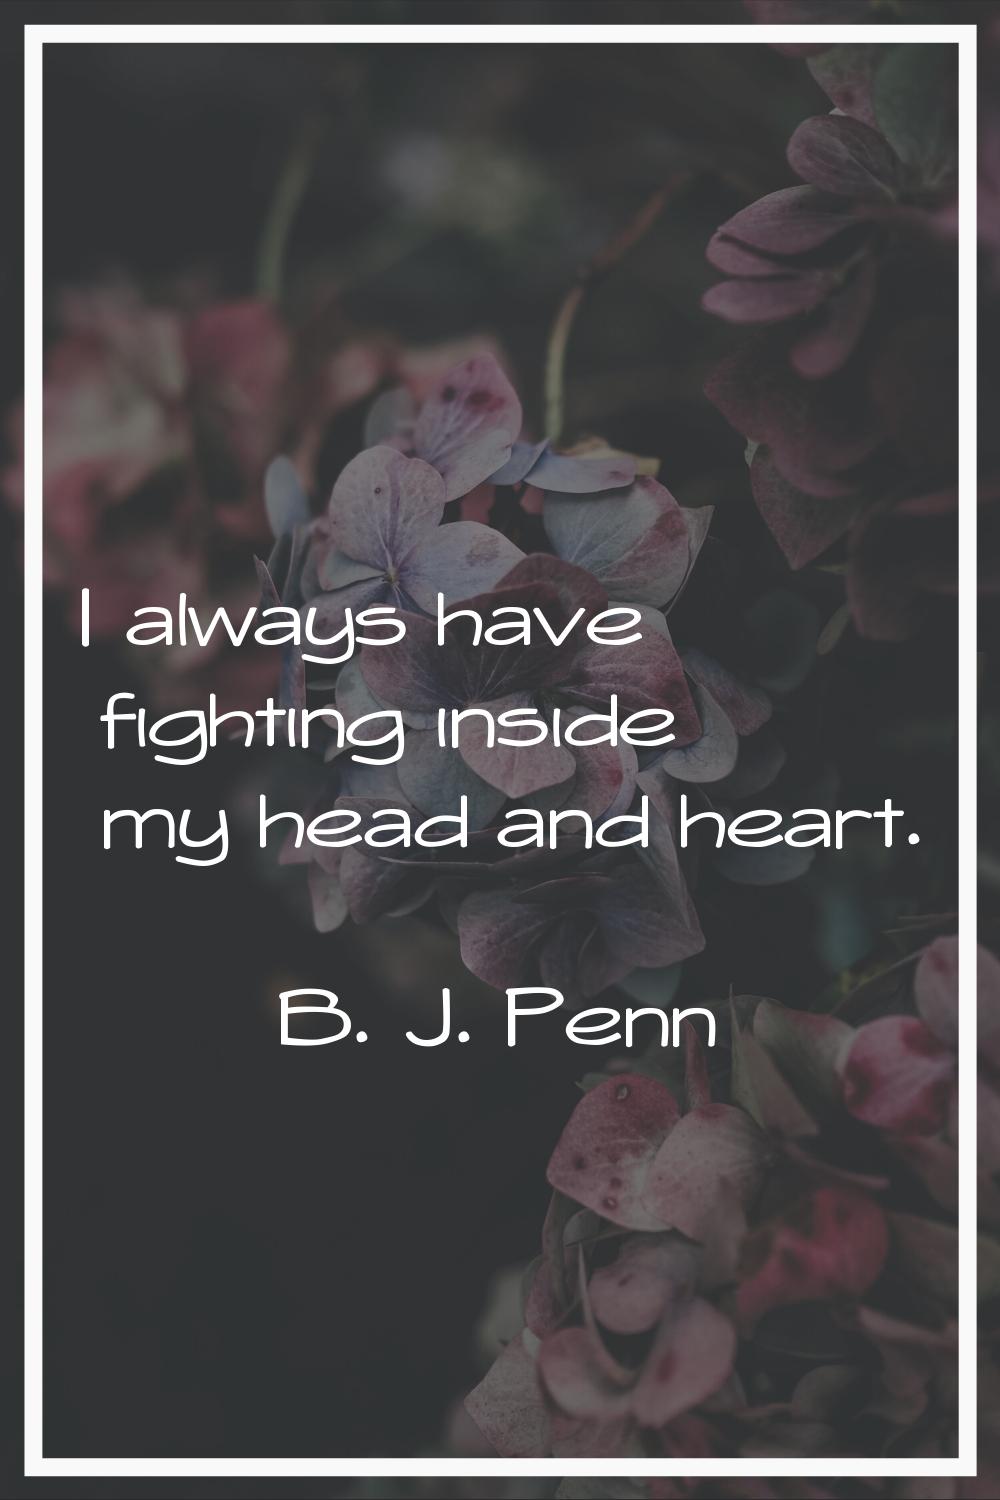 I always have fighting inside my head and heart.